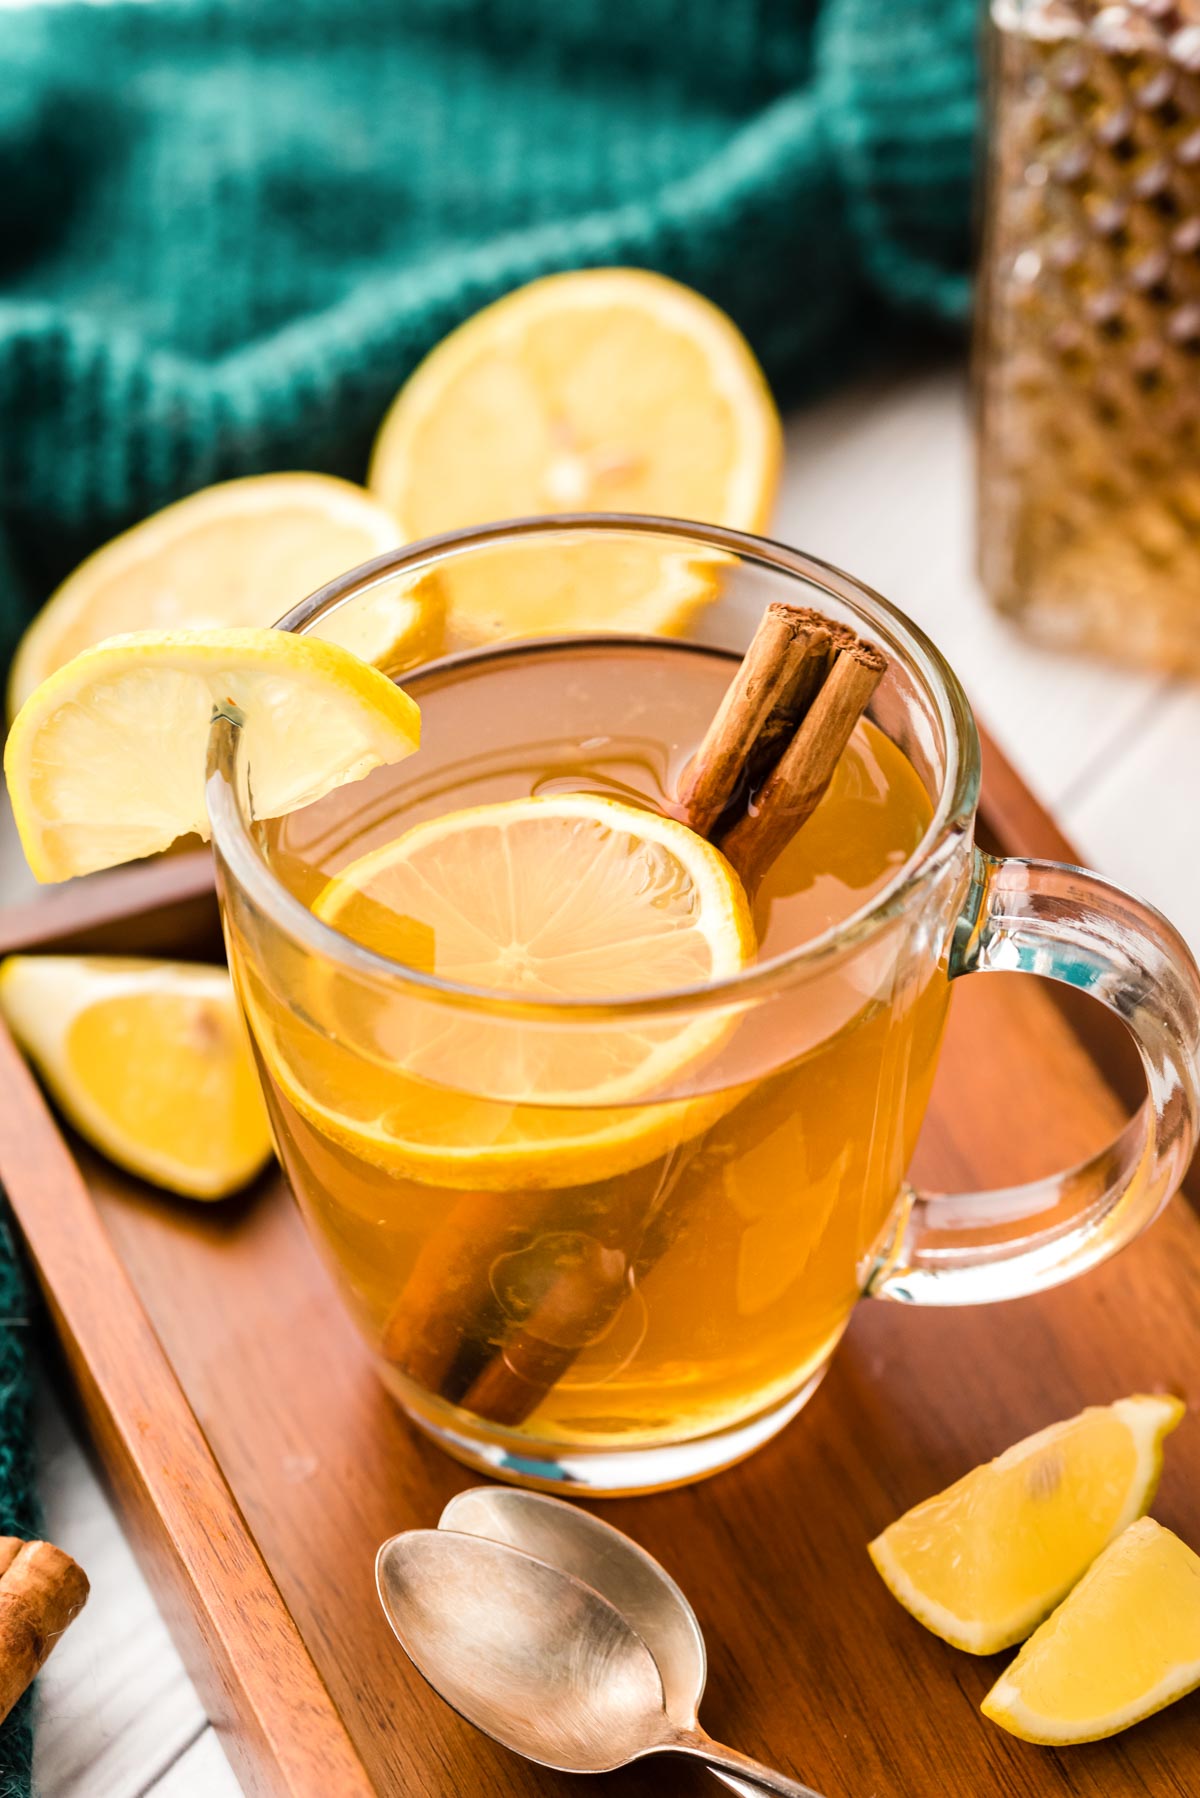 A clear mug filled with a hot toddy with a lemon slice and cinnamon stick.